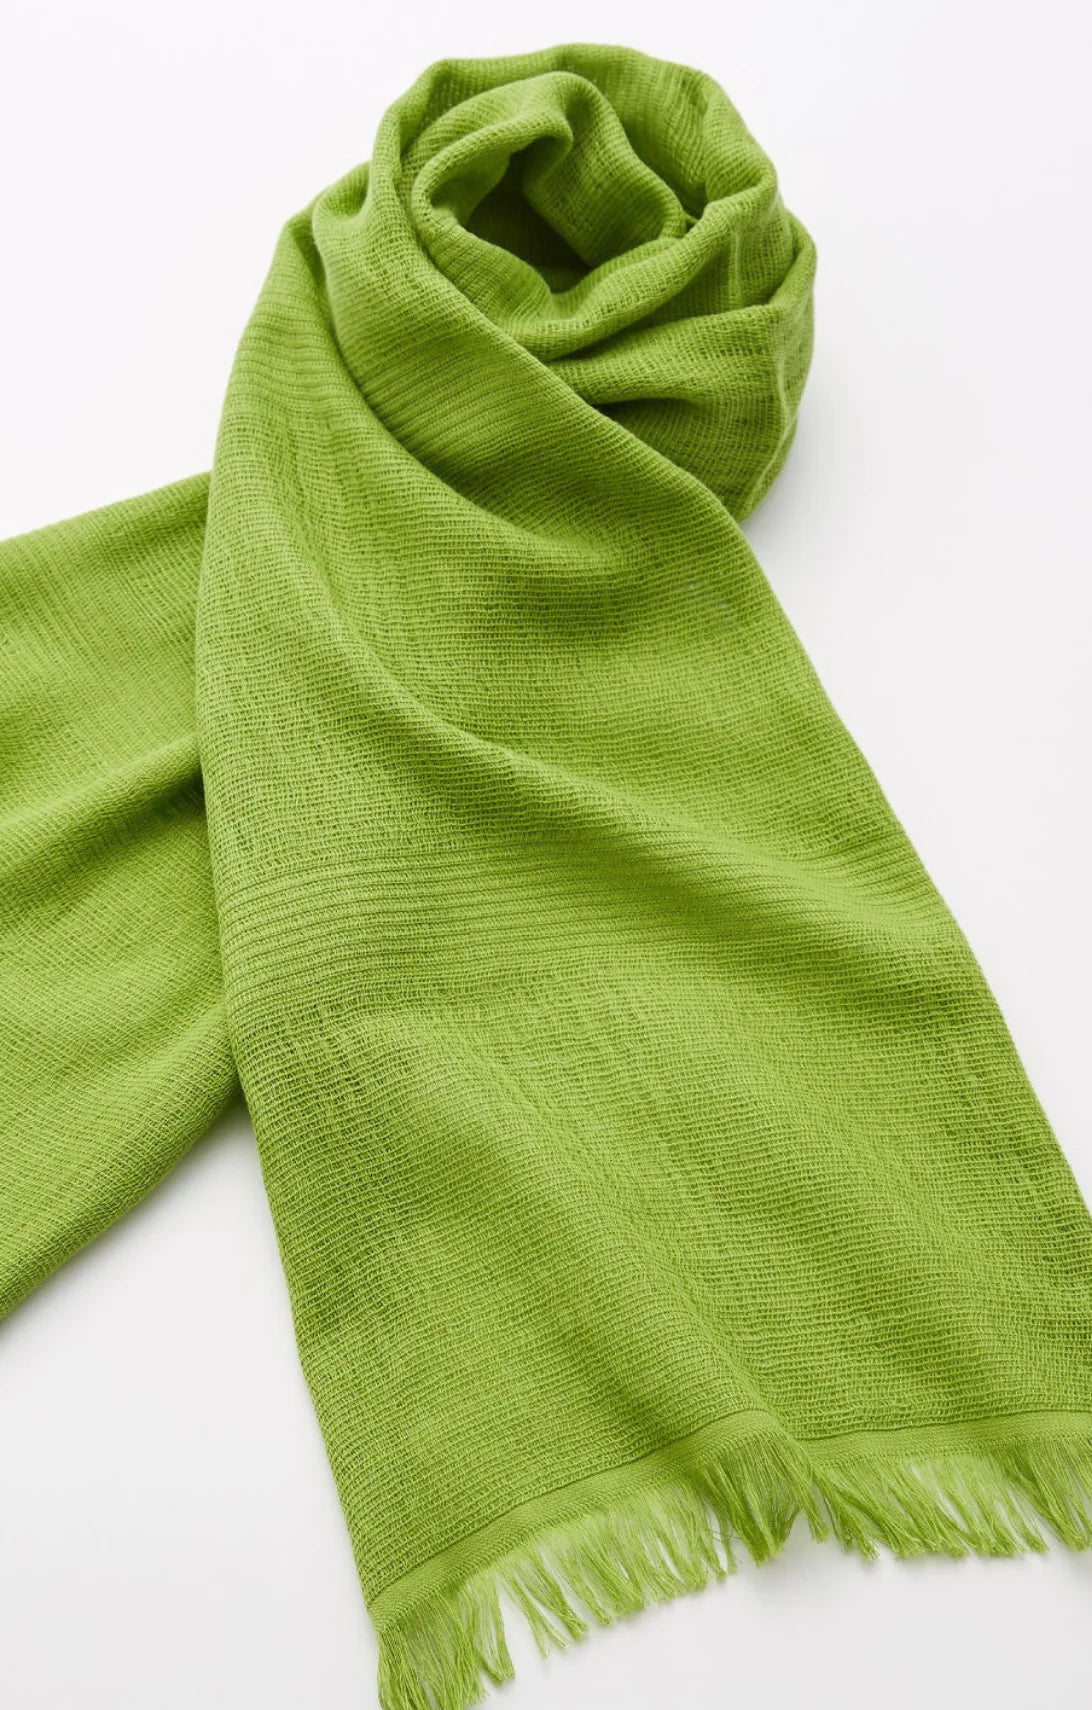 Tabbisocks Supima Organic Cotton Scarf in bright yellow-green Apple Green color